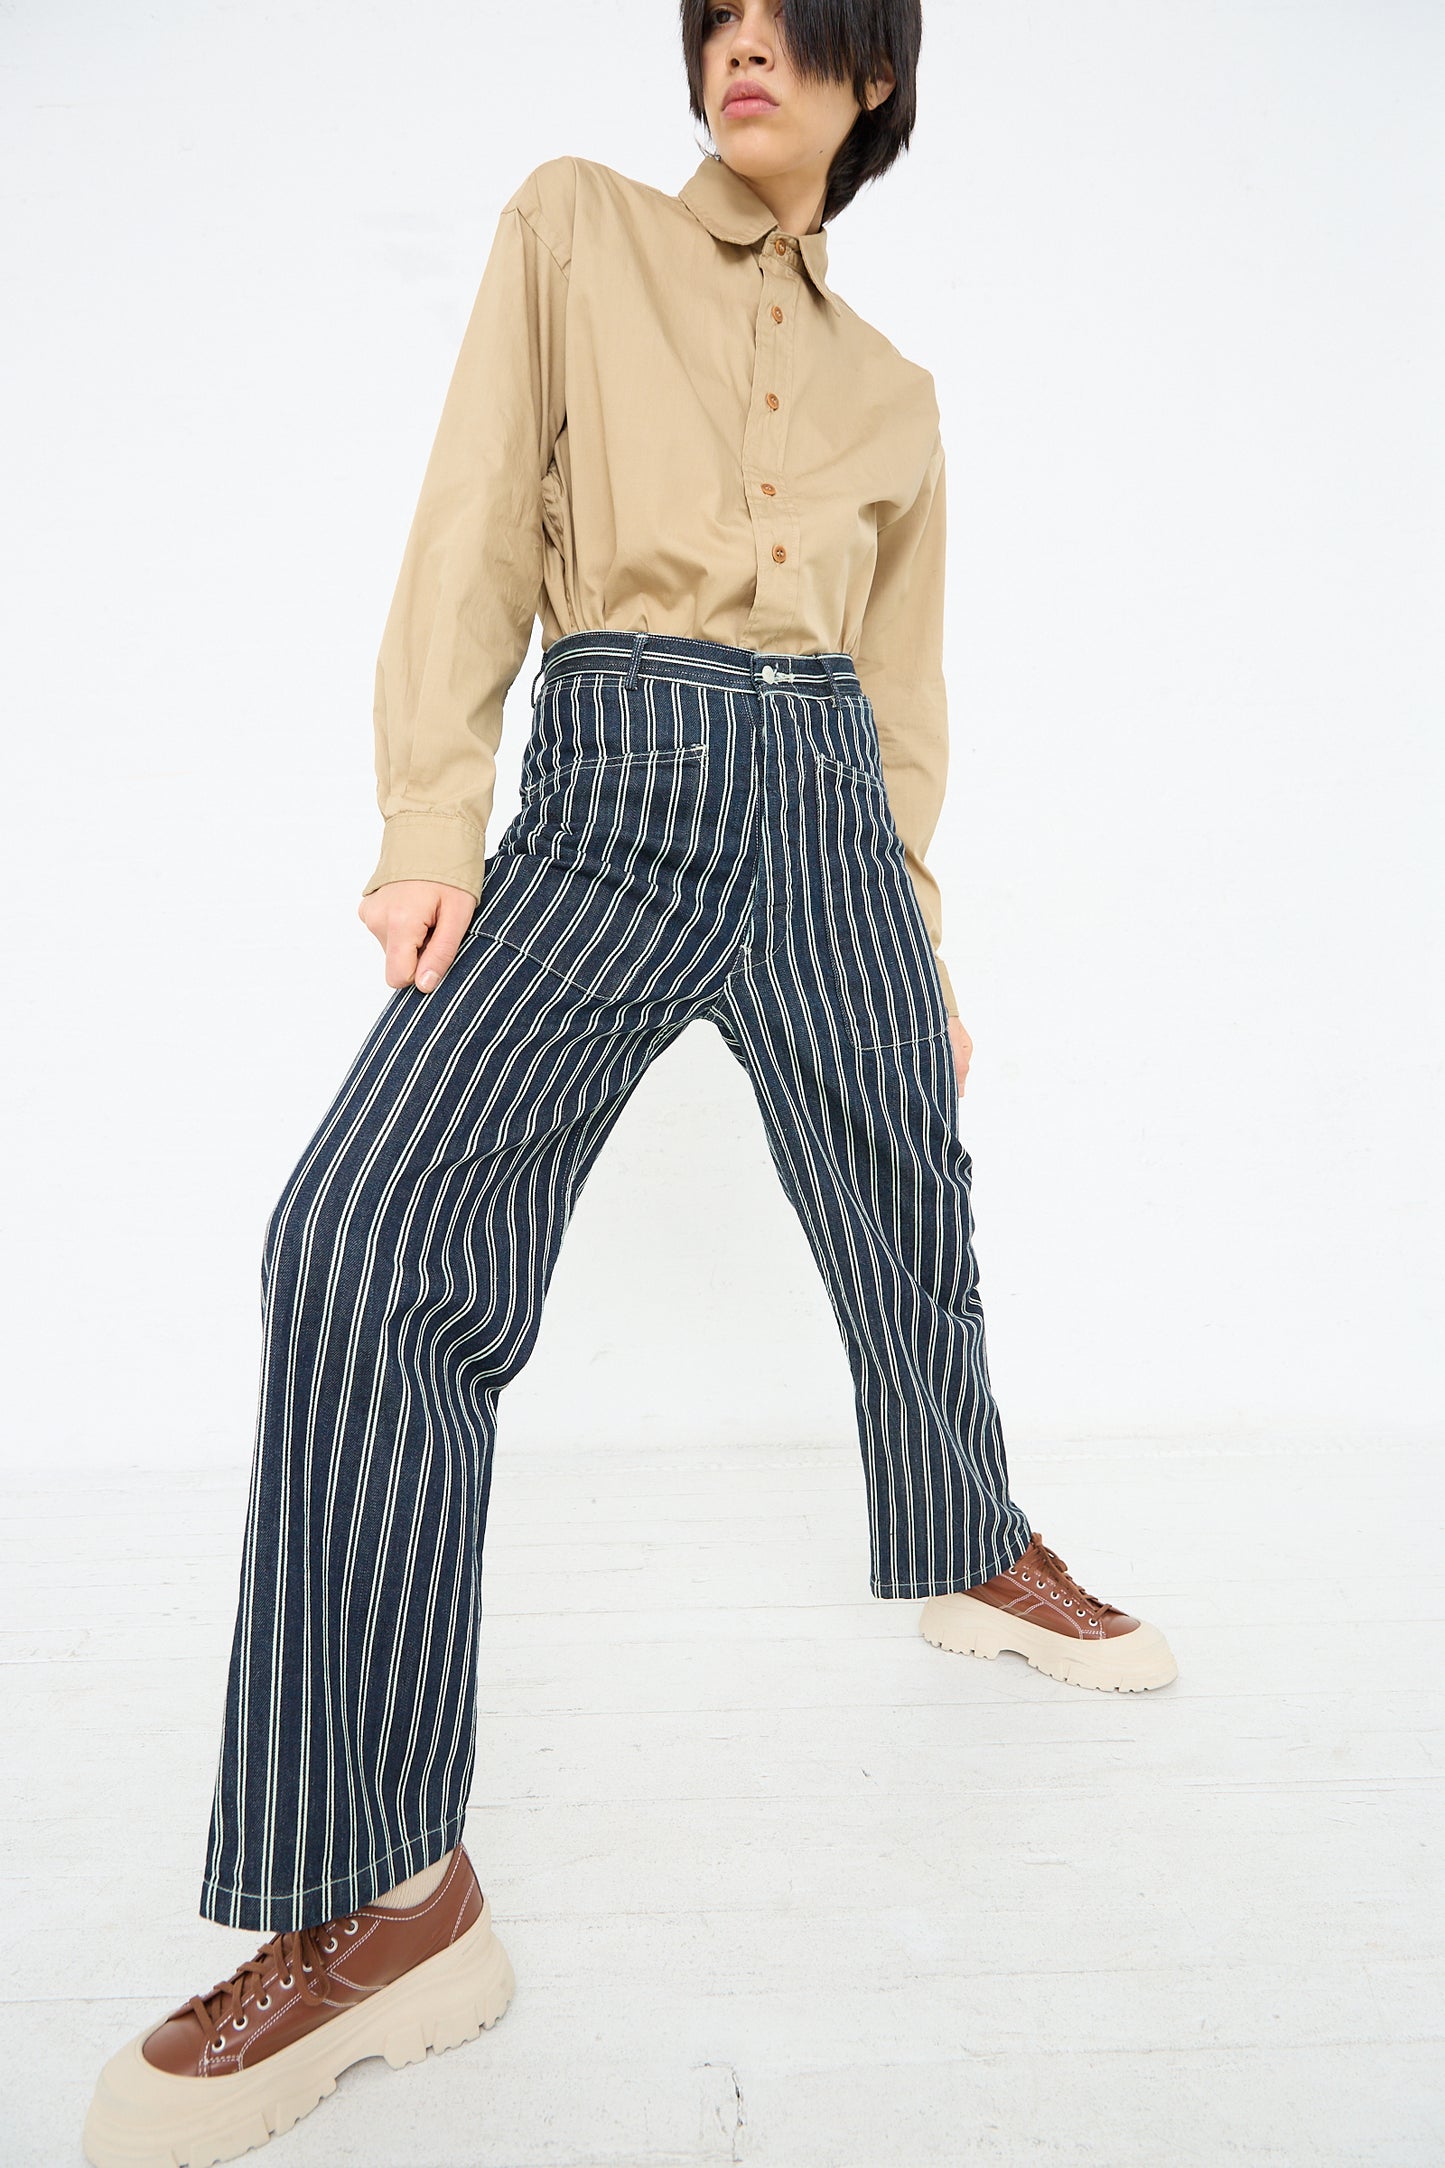 A person stands posing in a beige button-up shirt and high waisted navy blue pinstripe Brancusi Pant in Indigo Denim Stripe, paired with tan and brown platform shoes, against a white background. Brand Name: As Ever